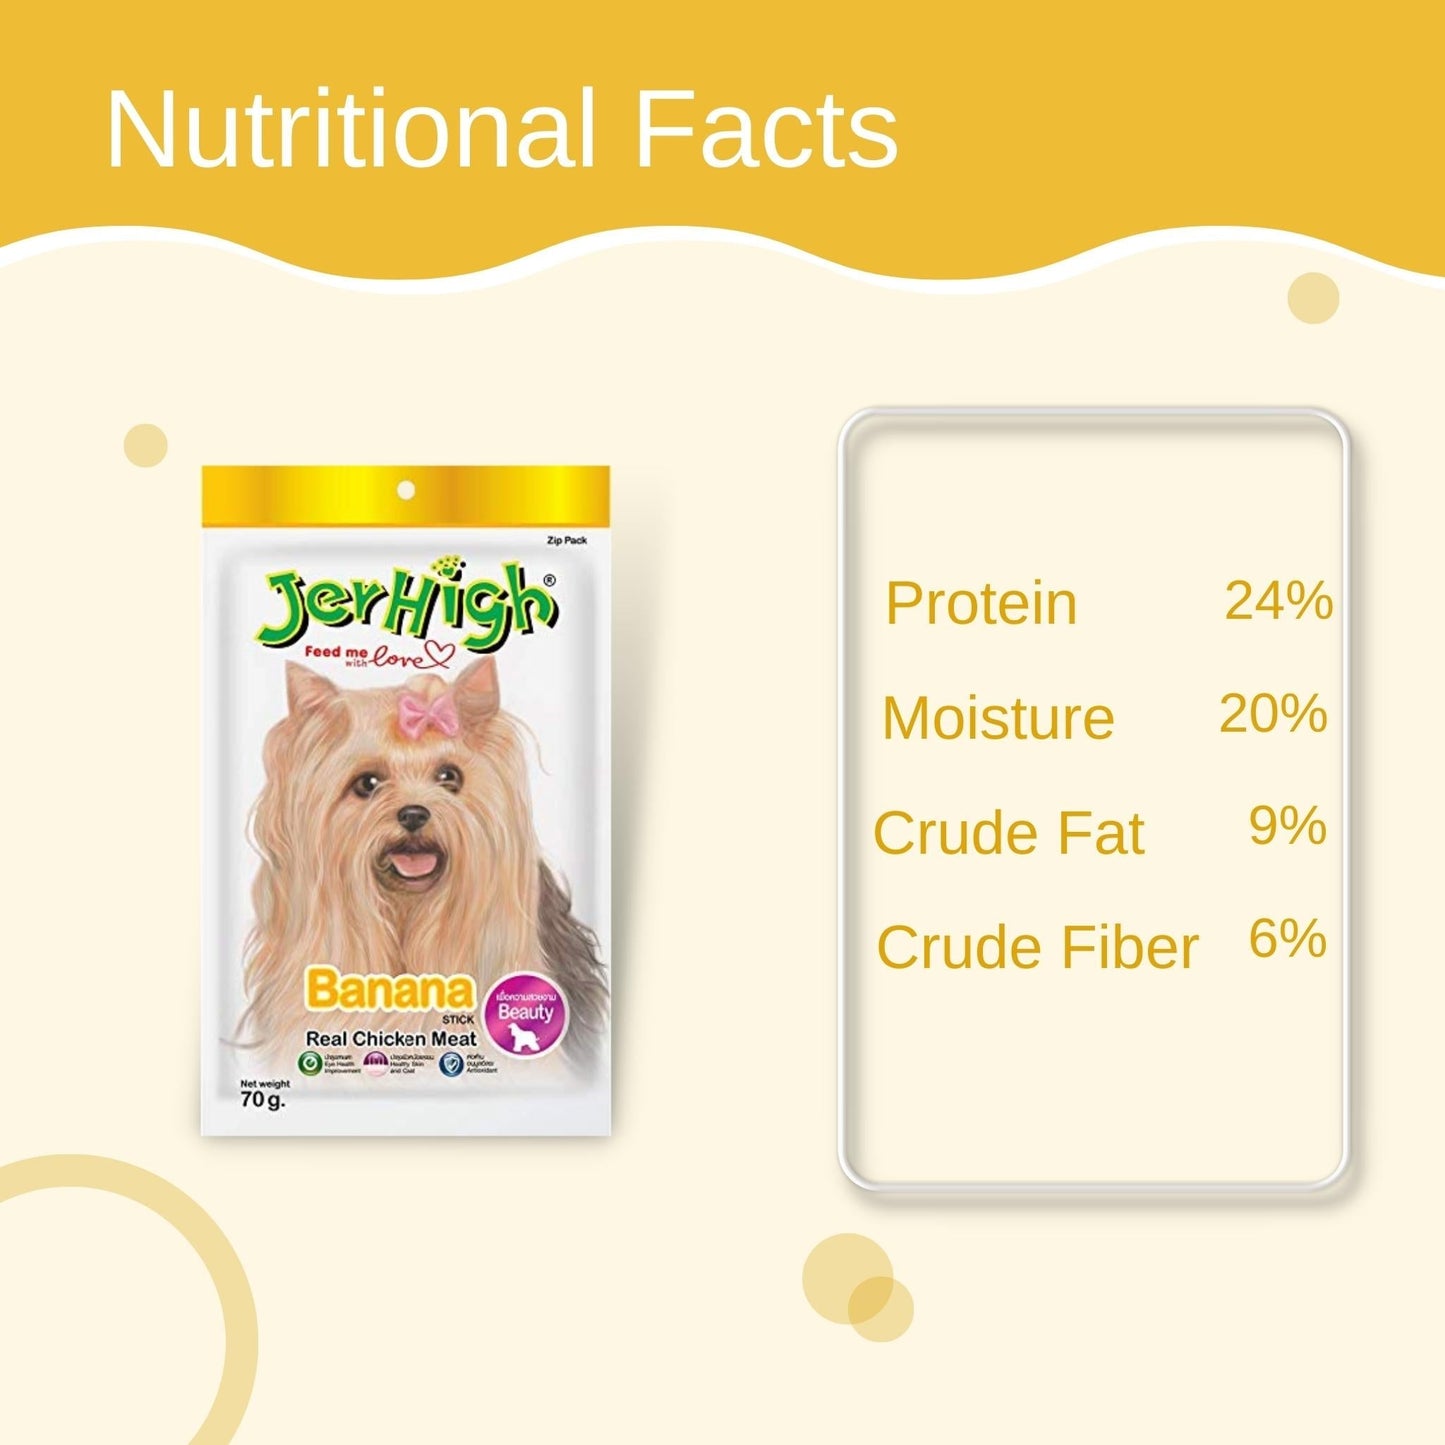 JerHigh Banana Stick Dog Treat with Real Chicken Meat - 70g, Pack of 3